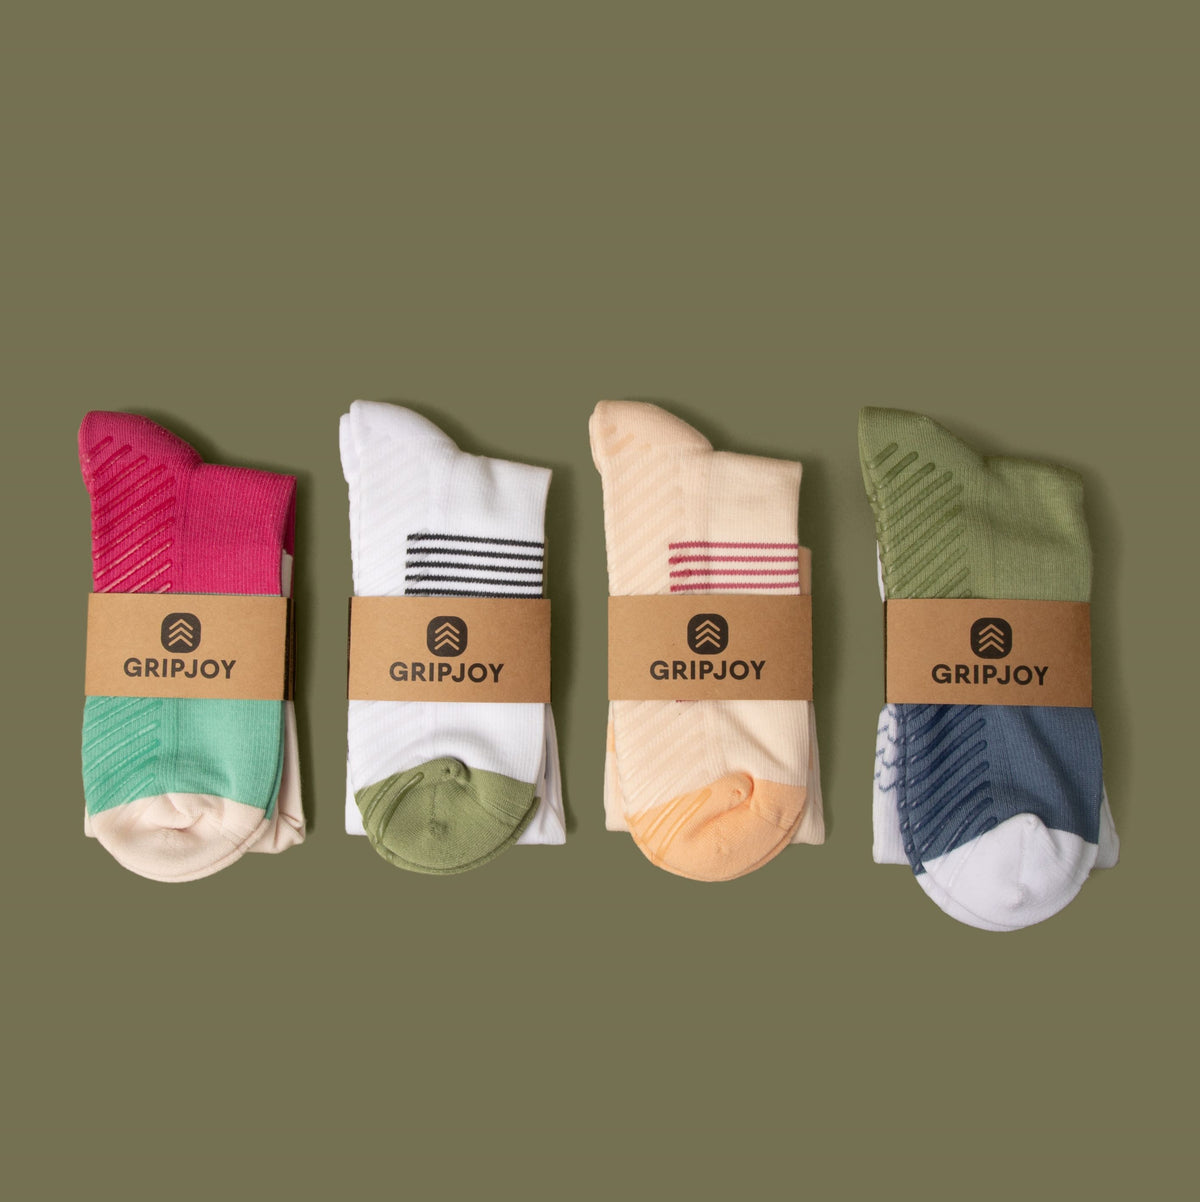 Pilates Socks with Grips for Women - 2-Pack Non Slip Cotton and